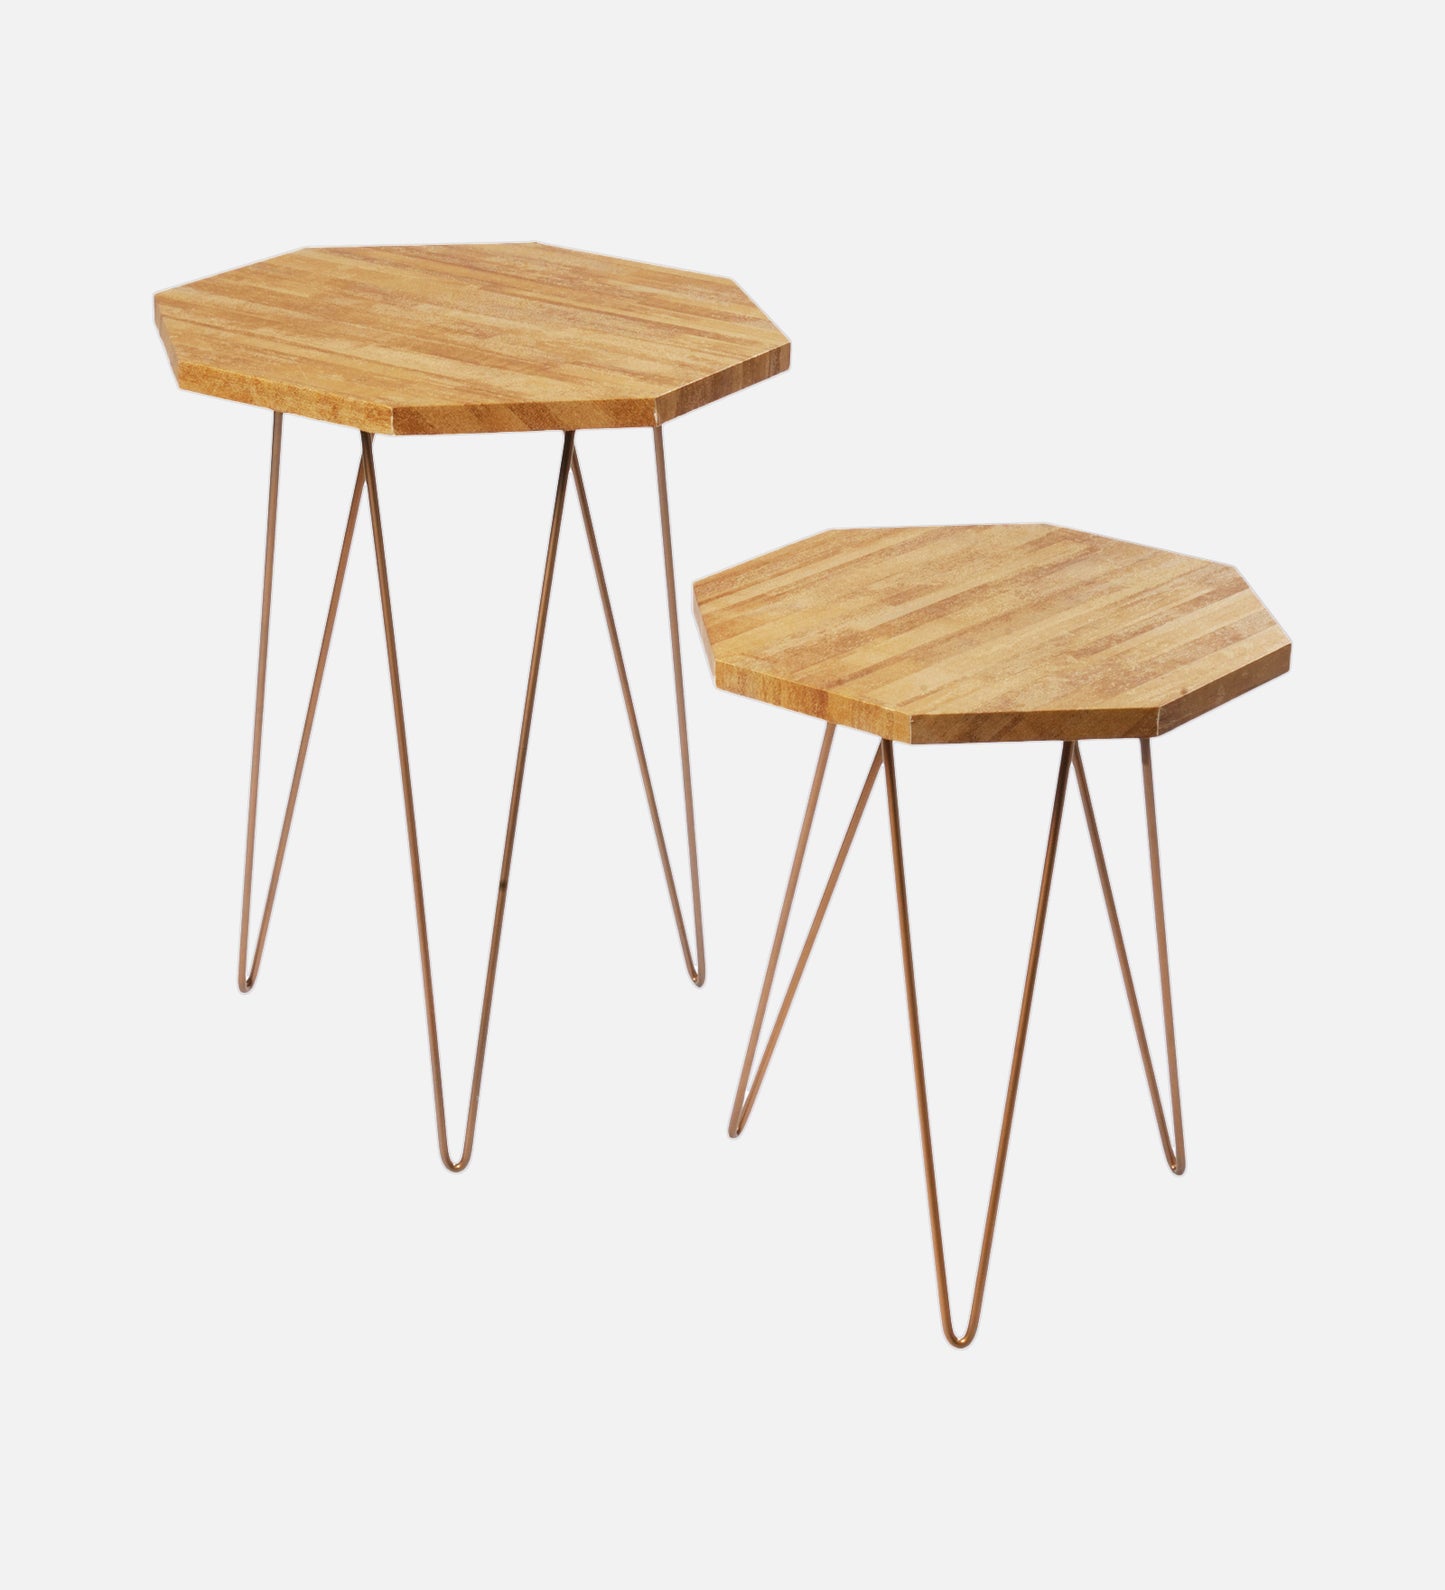 Gold Stacks Octagon Nesting Tables with Hairpin Legs, Side Tables, Wooden Tables, Living Room Decor by A Tiny Mistake